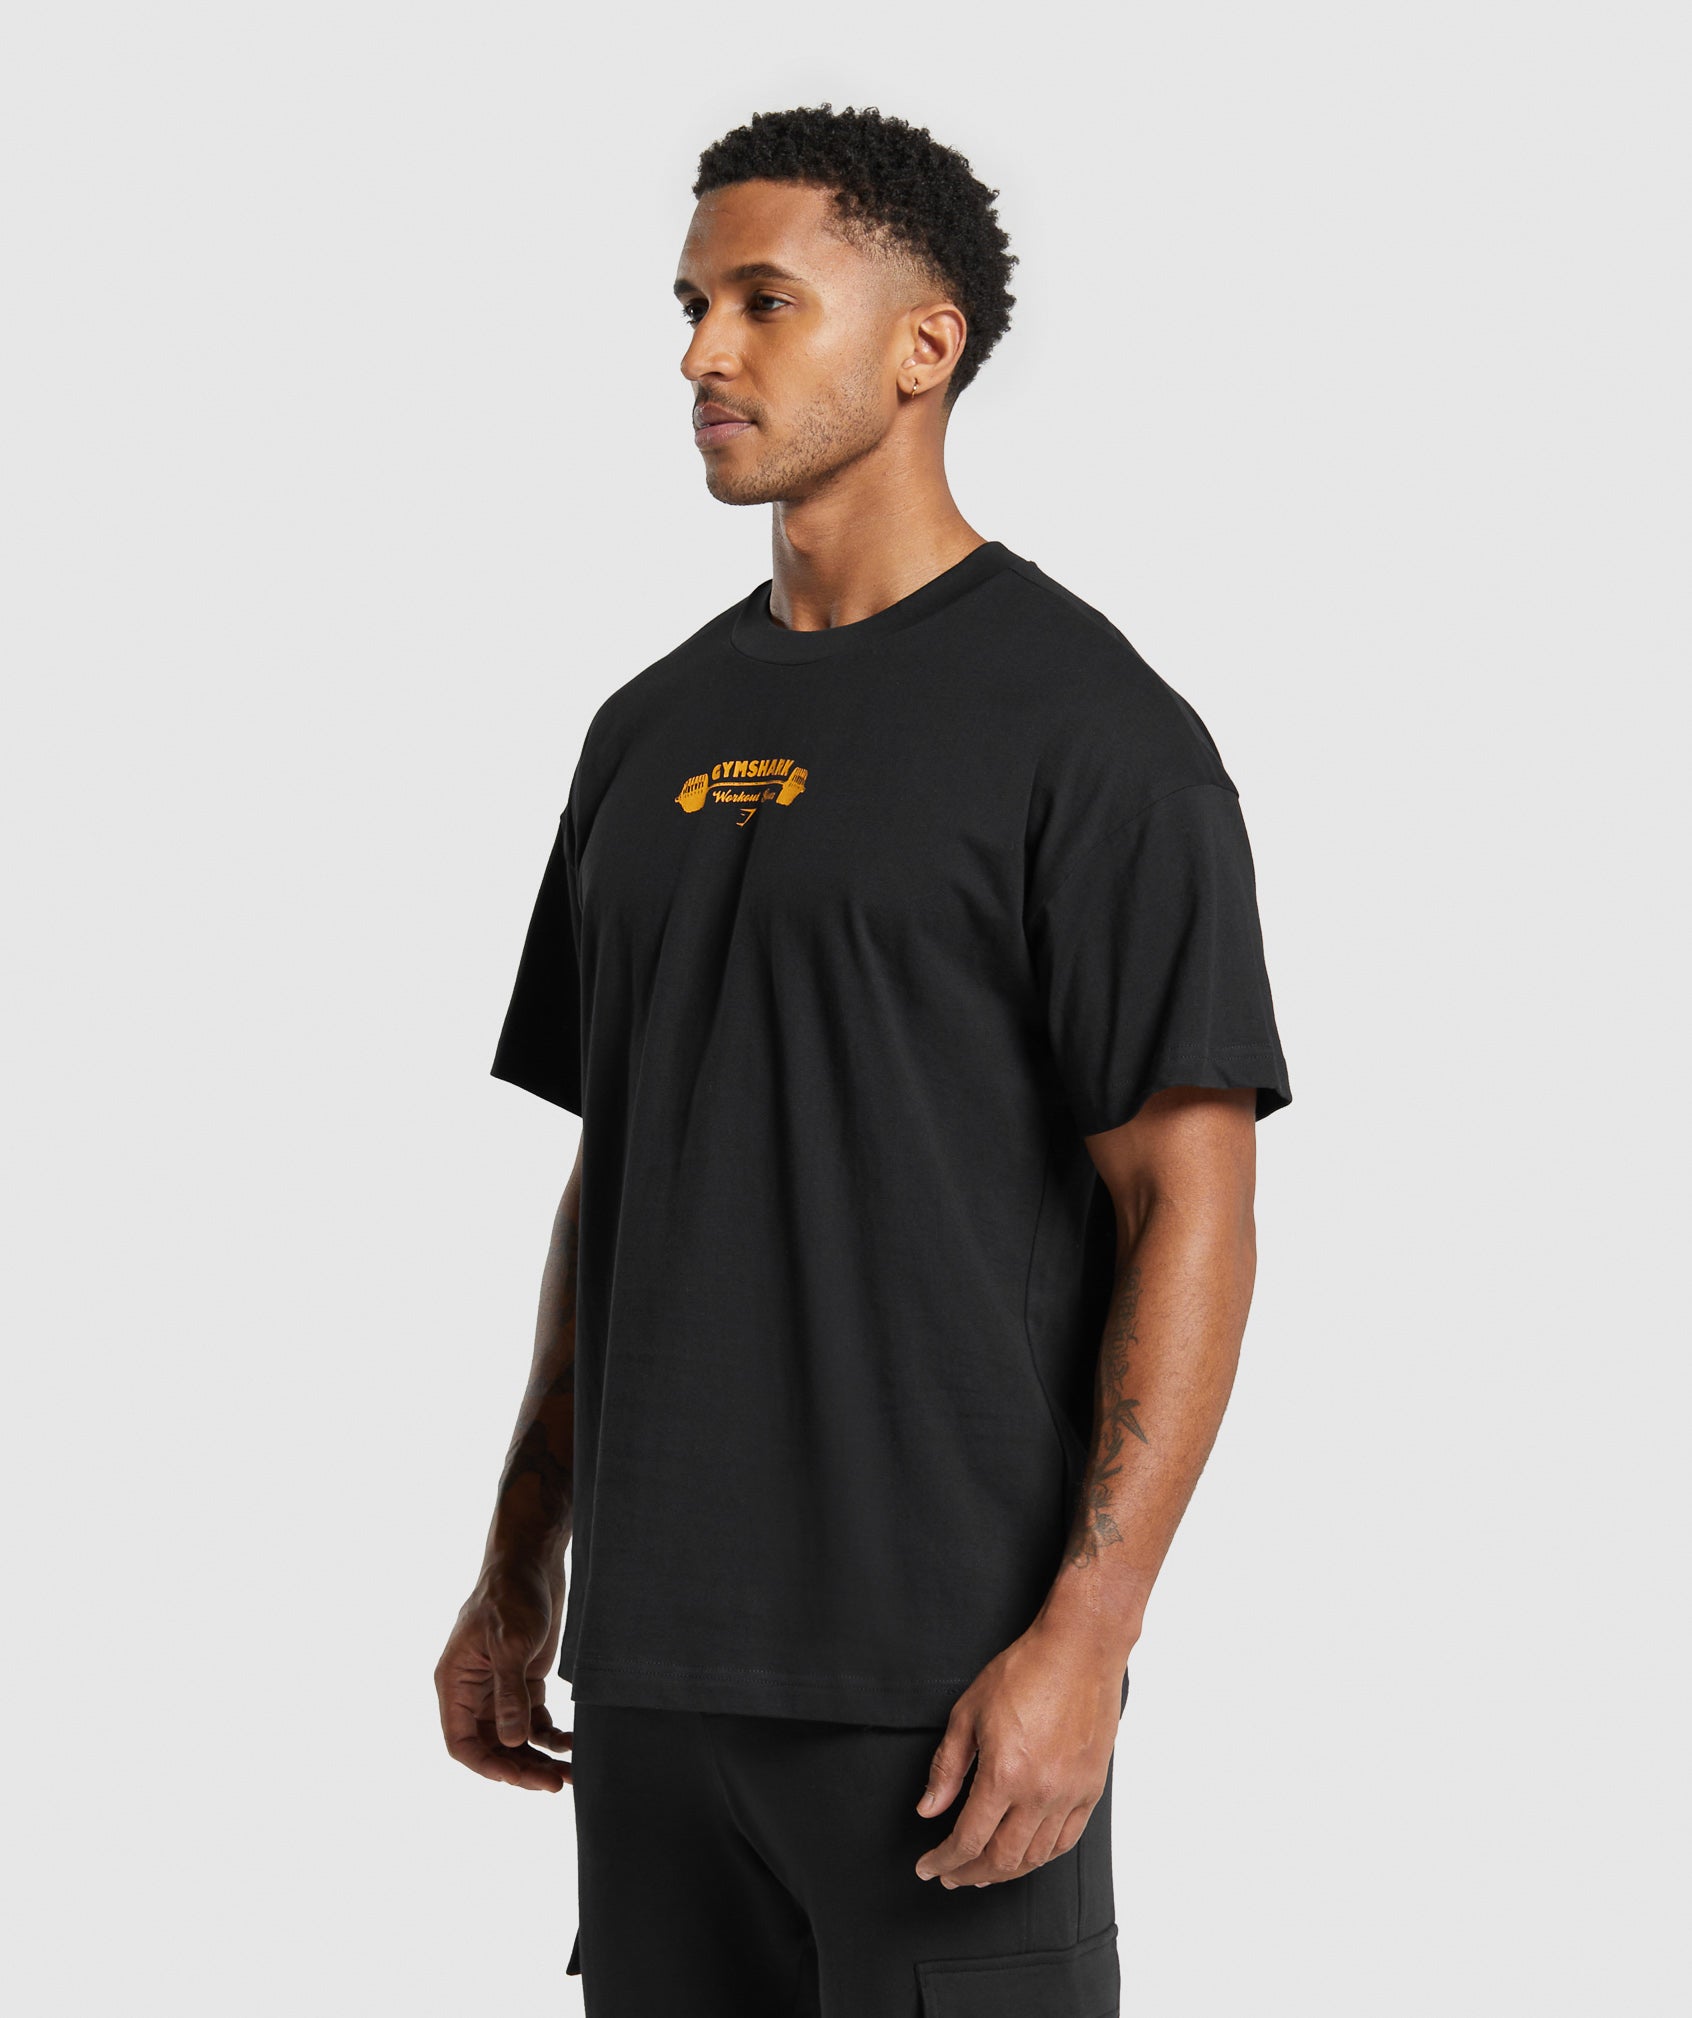 Workout Gear T-Shirt in Black - view 3